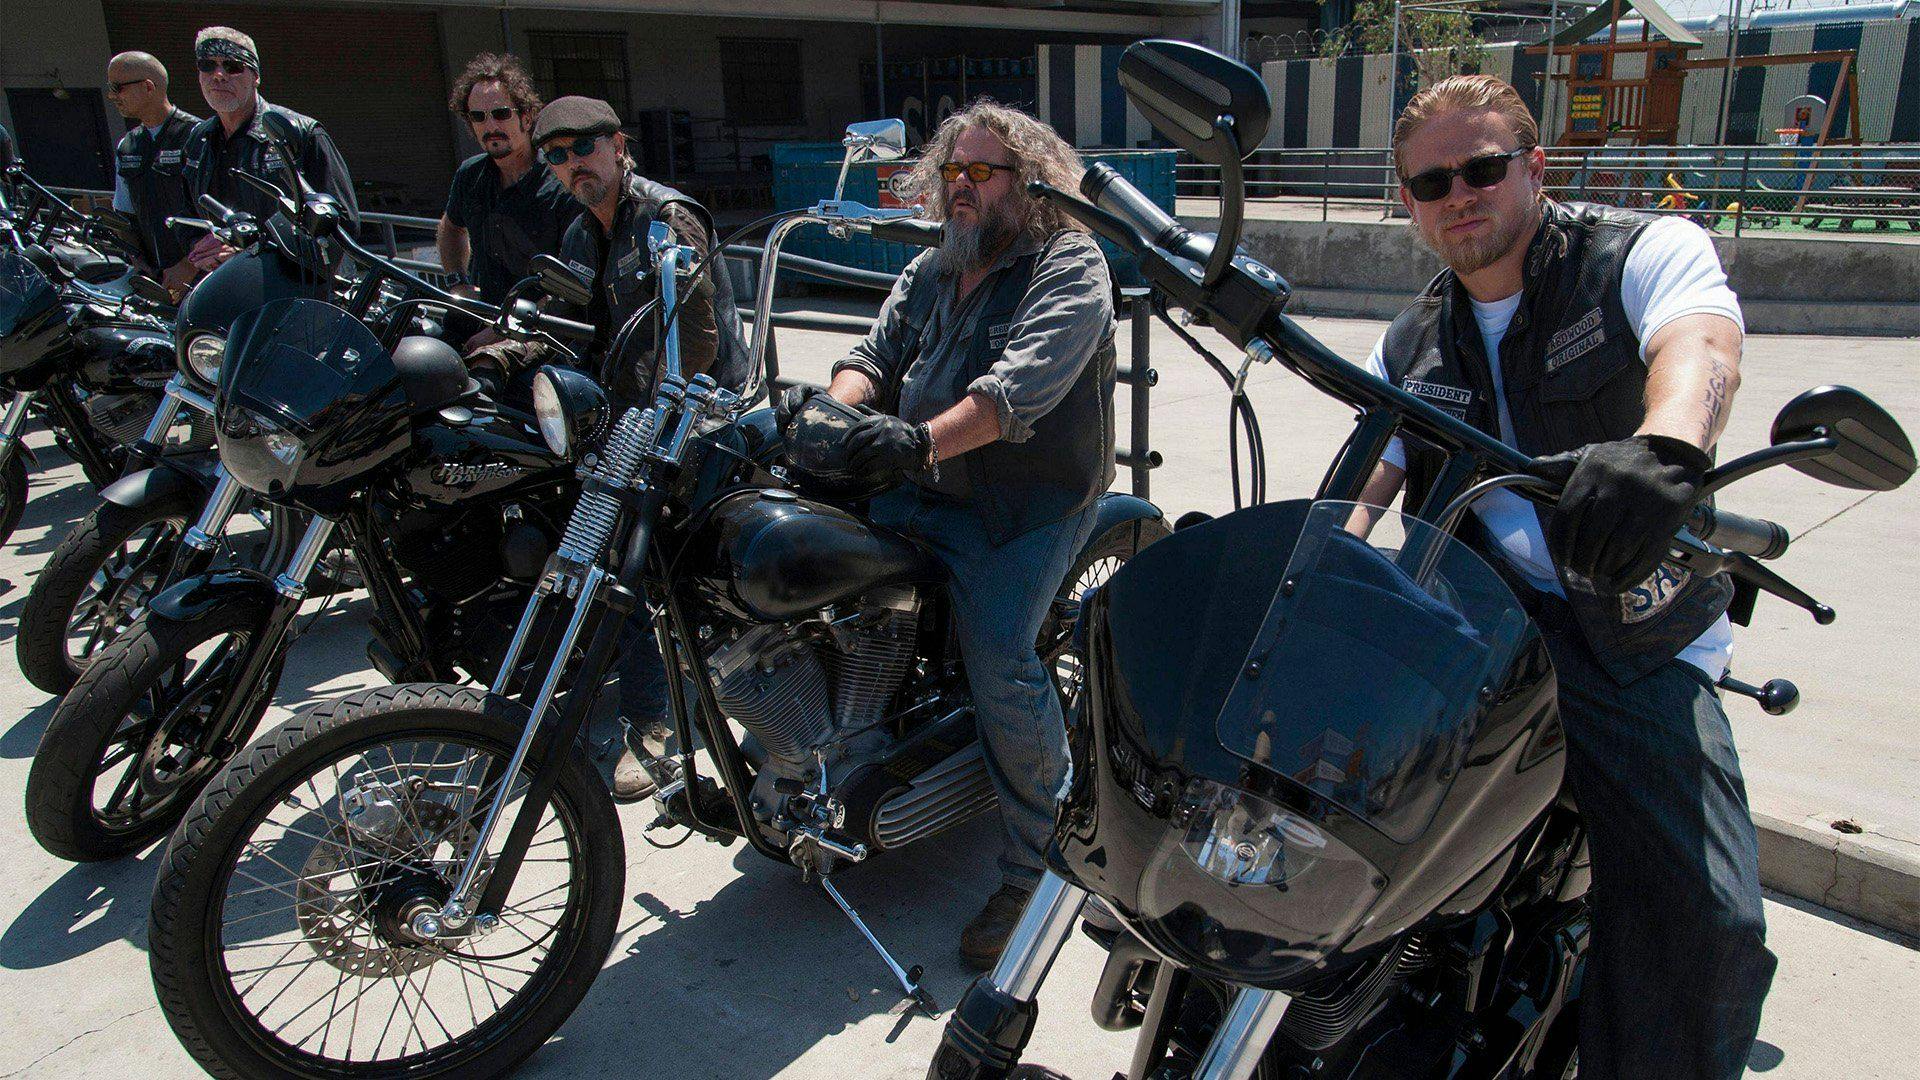 Some of the sons of anarchy cast on motorcycles